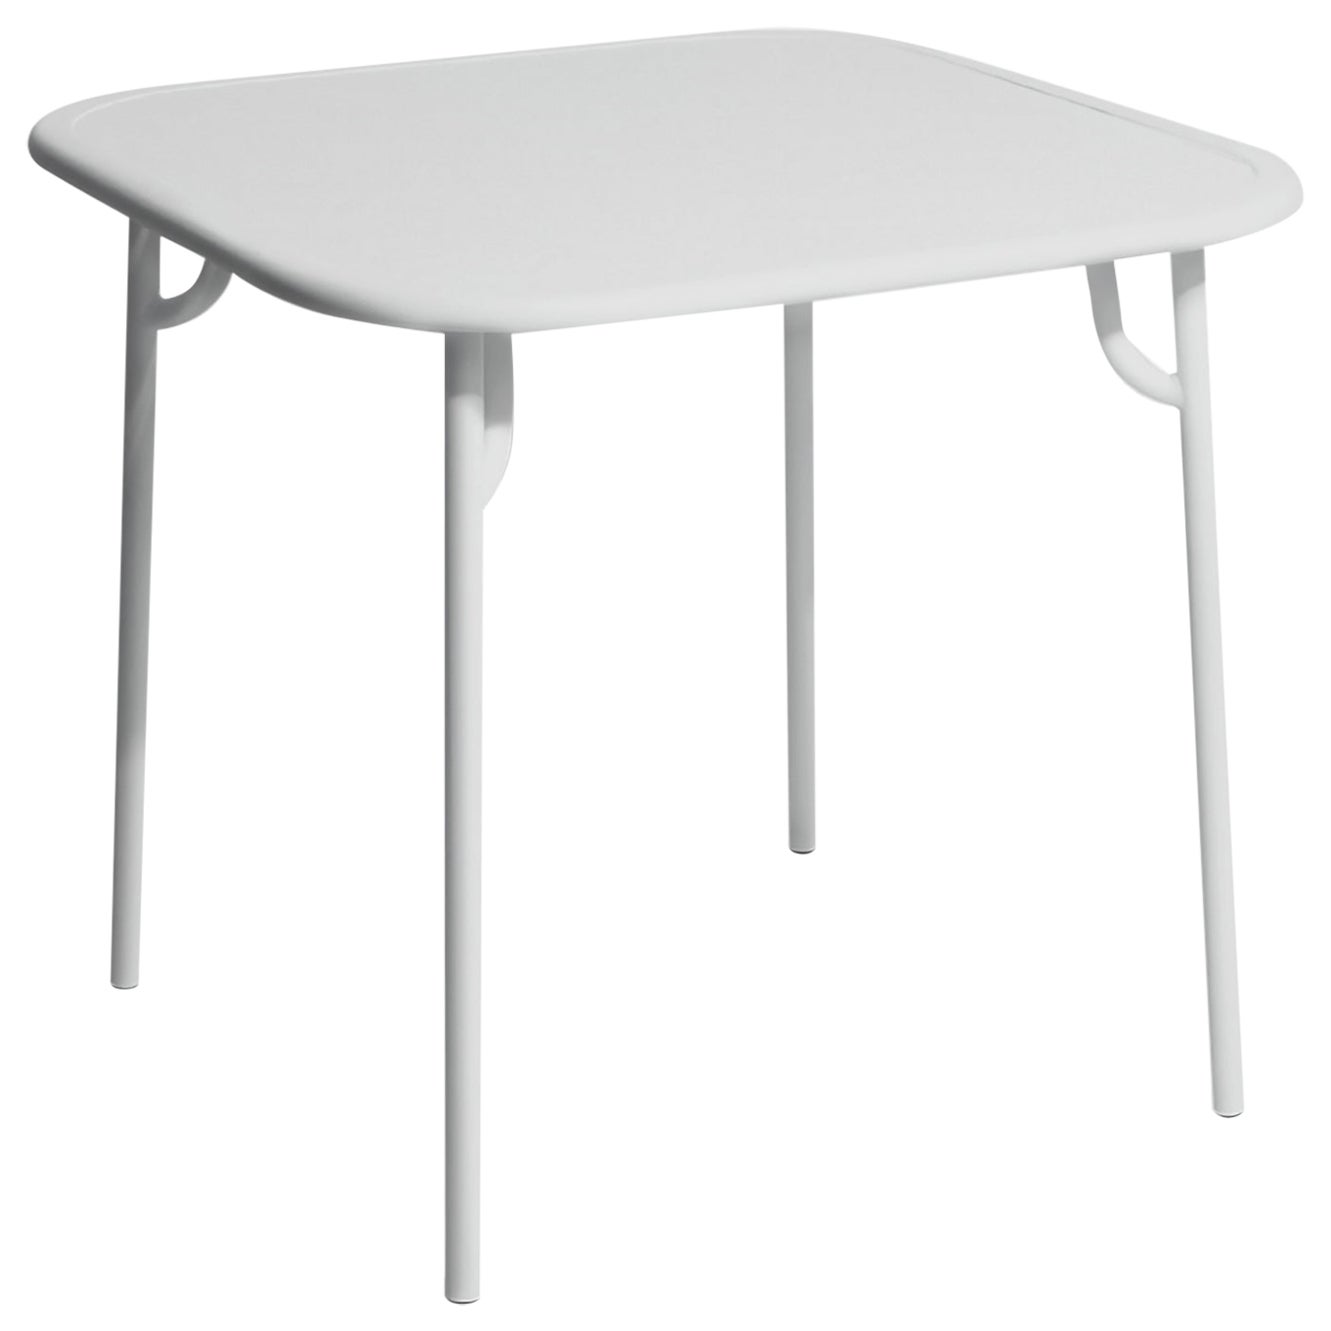 Petite Friture Week-End Plain Square Dining Table in Pearl Grey Aluminium, 2017 For Sale